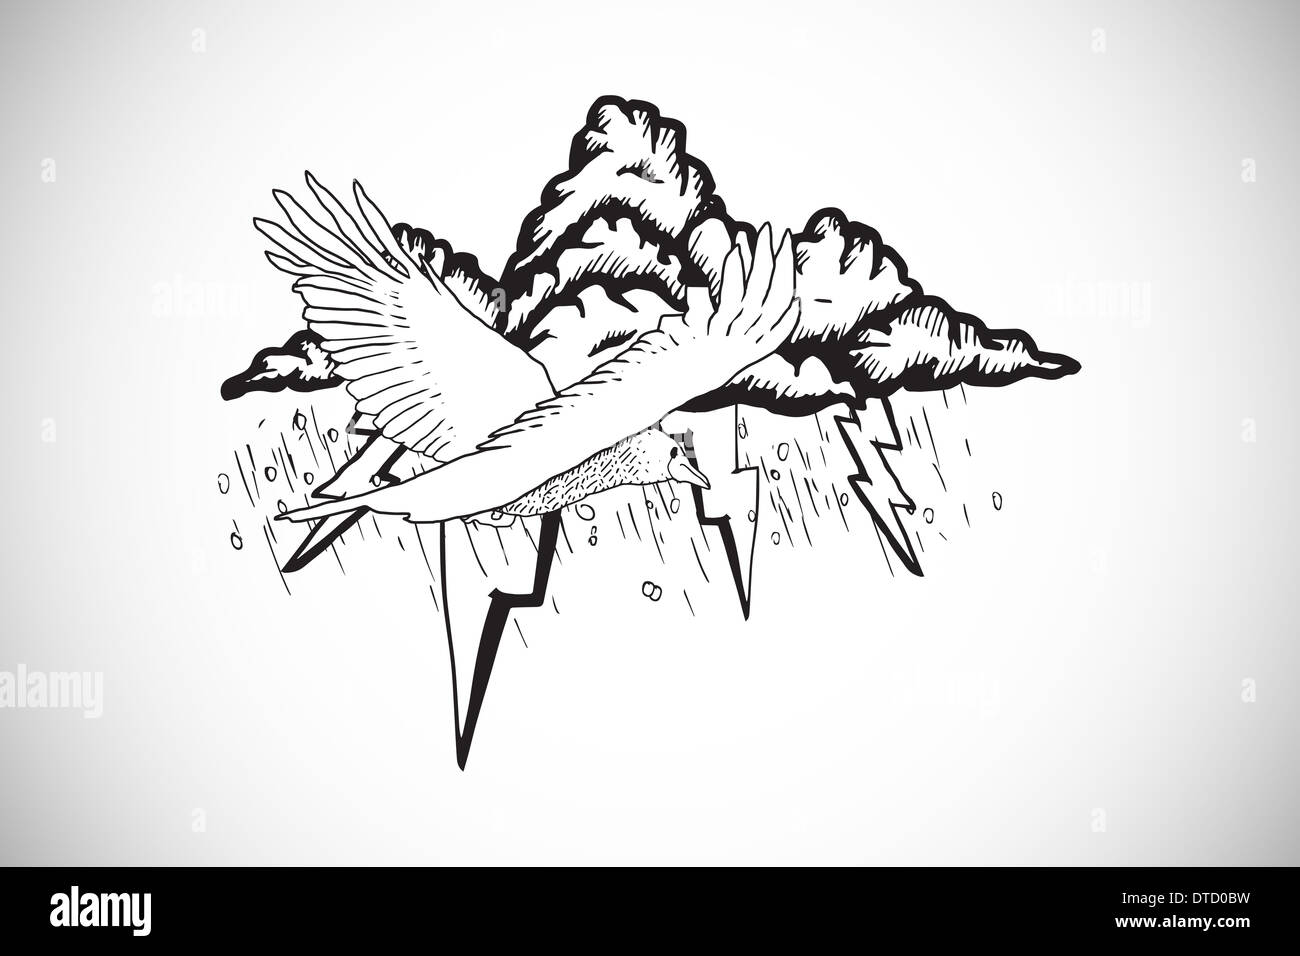 Composite image of bird flying in a storm doodle Stock Photo